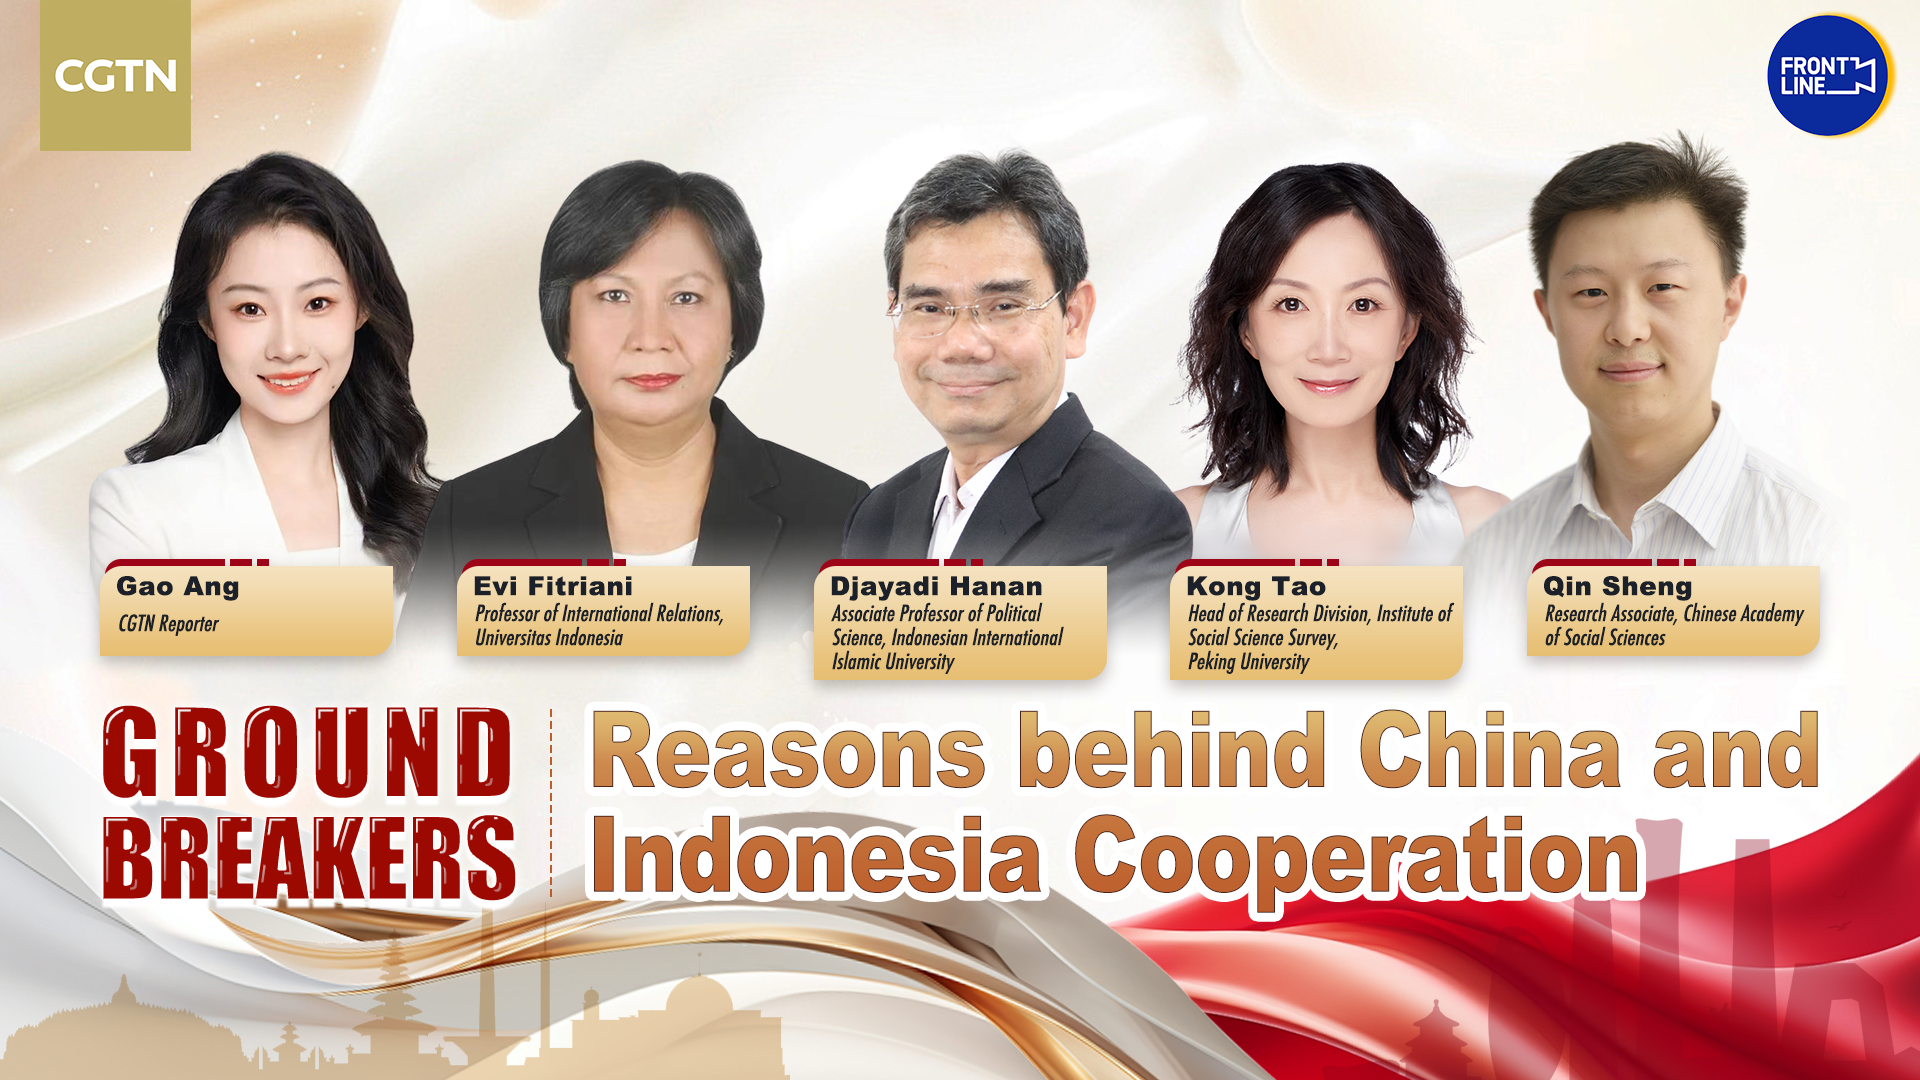 Live: Ground Breakers – Reasons behind China and Indonesia Cooperation